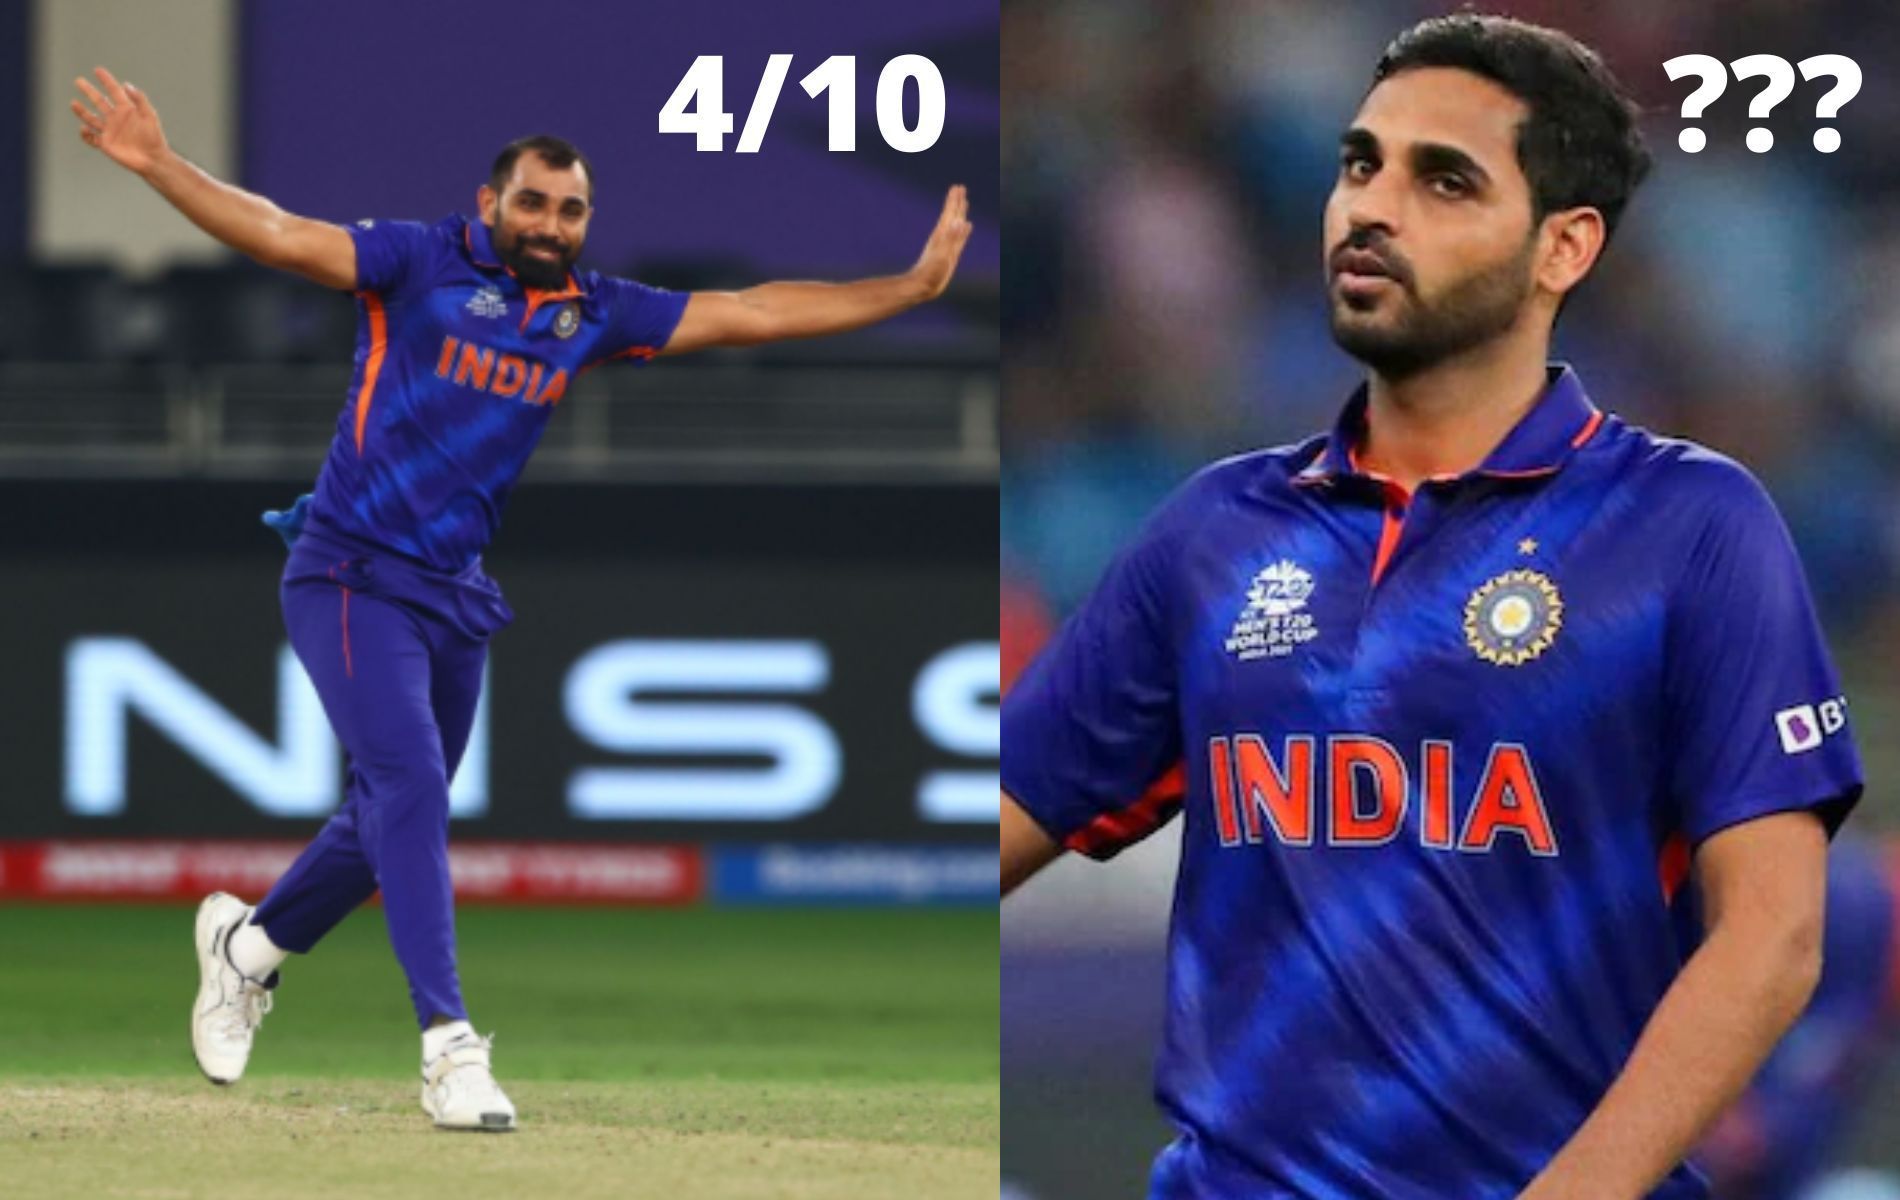 Mohammed Shami (L) and Bhuvneshwar Kumar had contrasting journeys at the T20 World Cup 2021